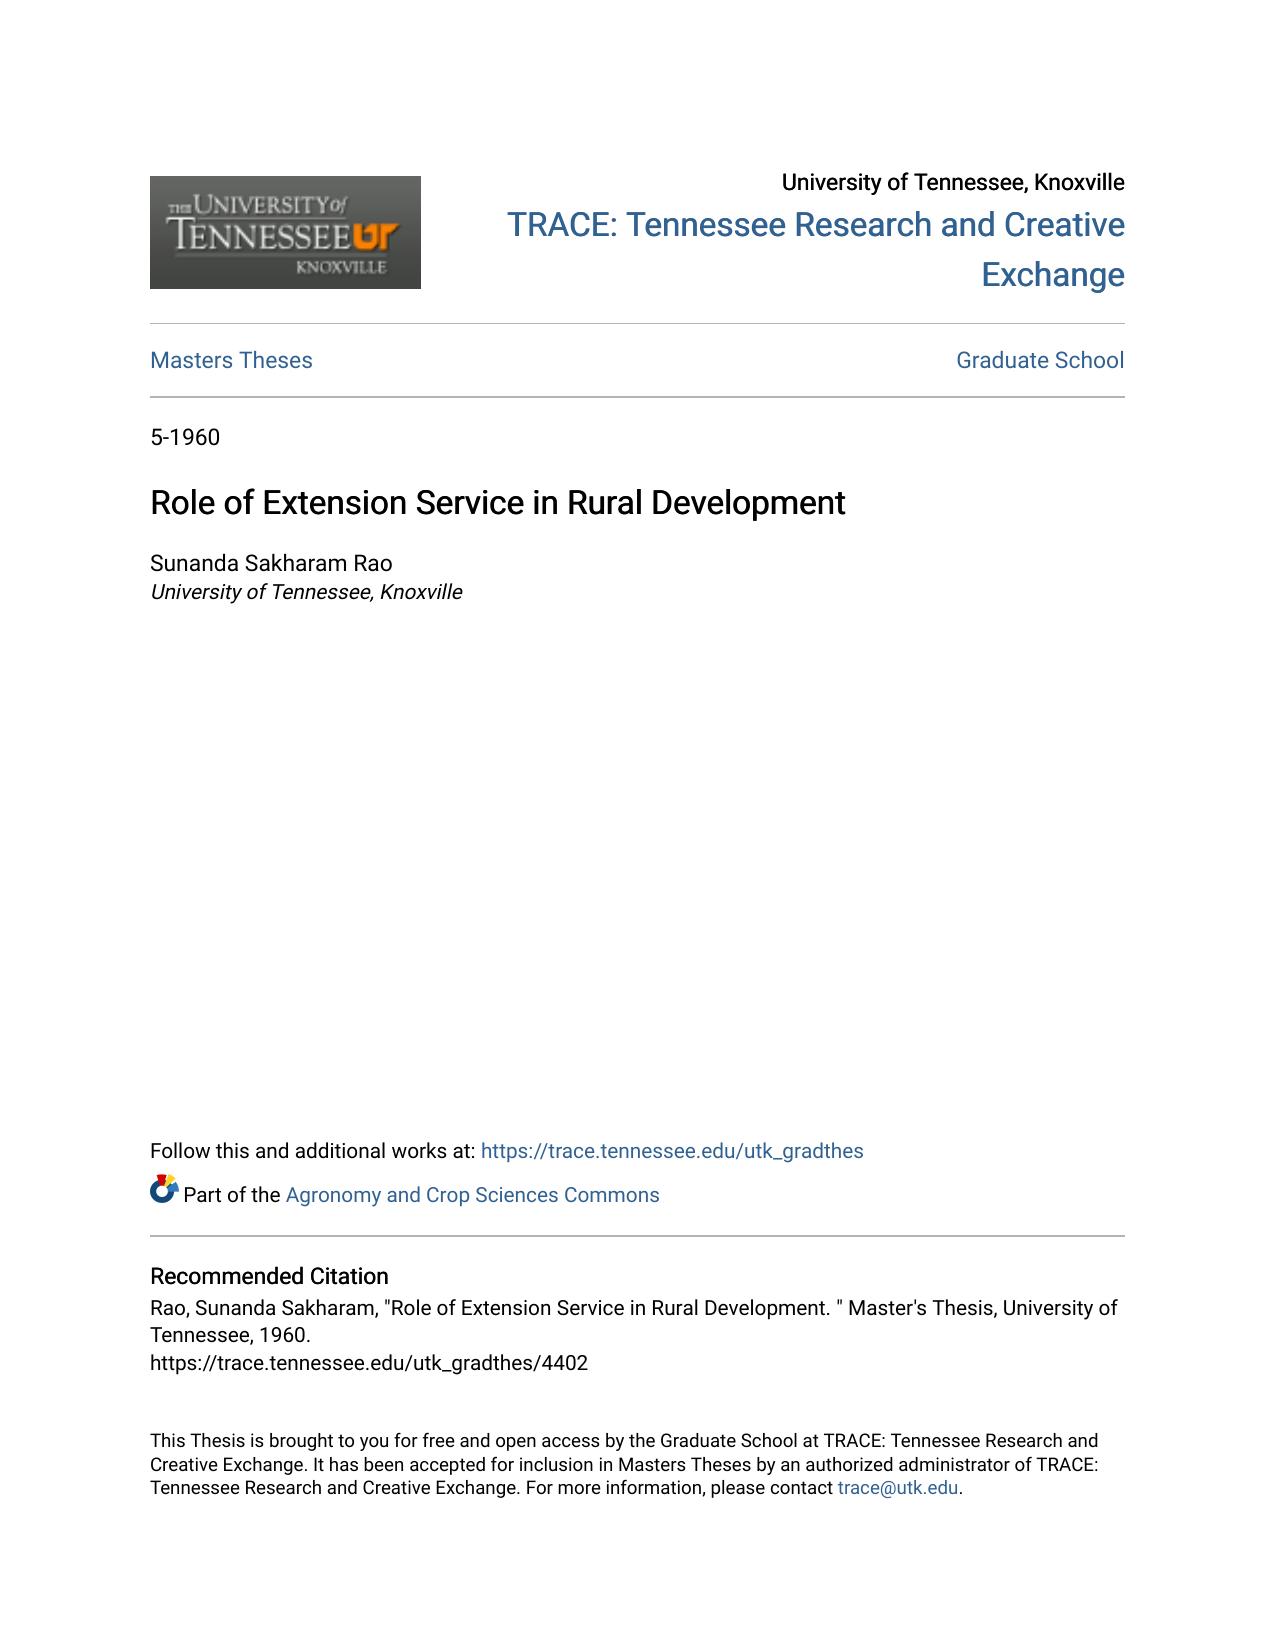 Role of Extension Service in Rural Development